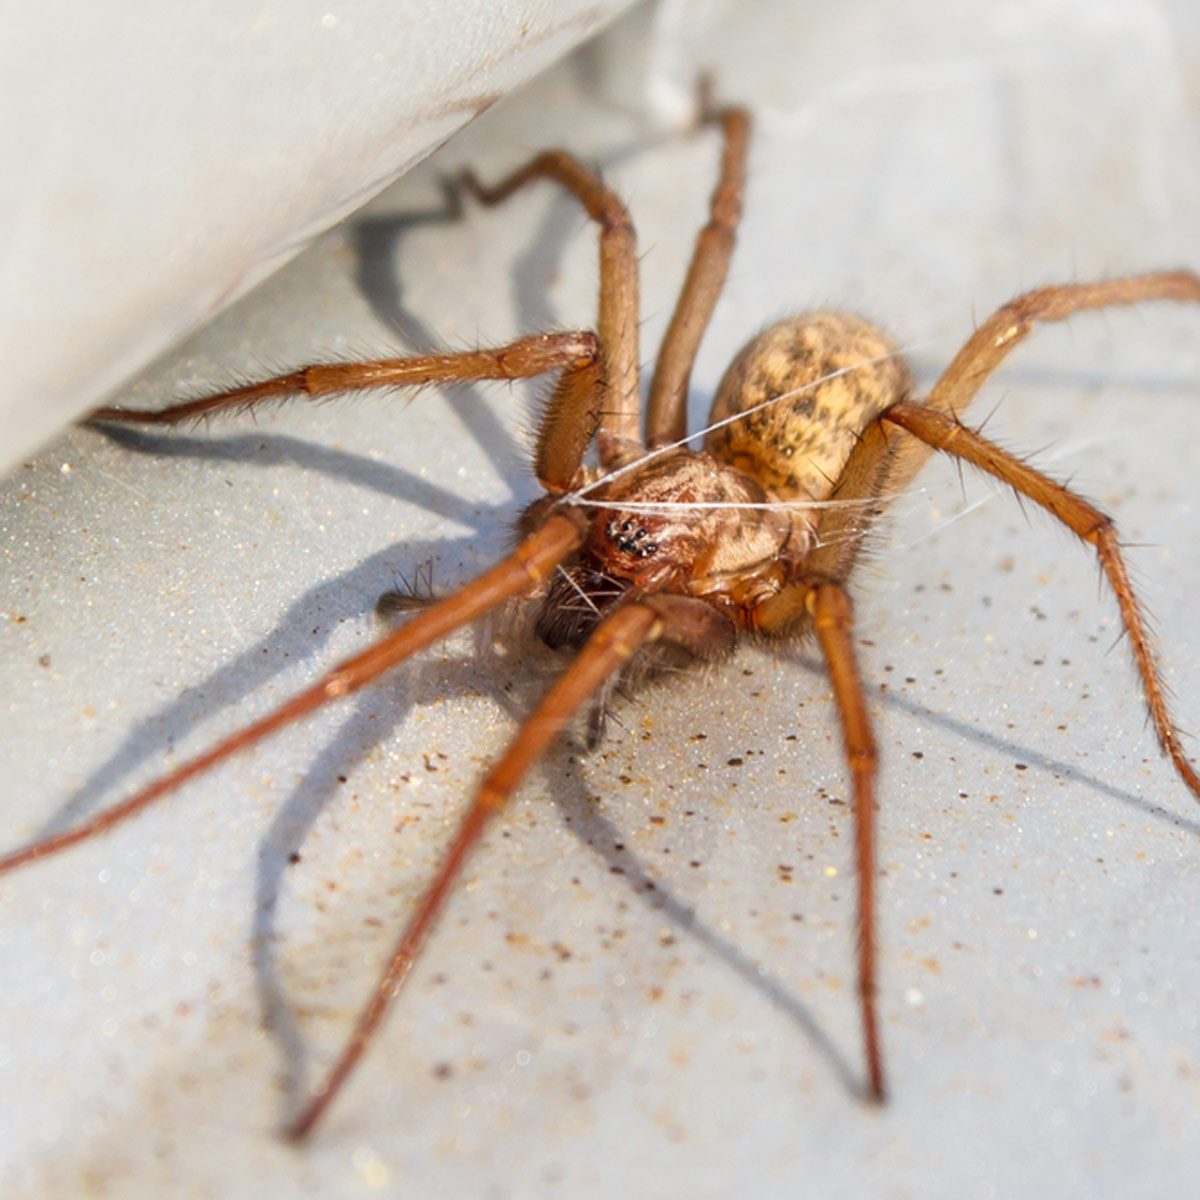 How to get rid of spiders in my house when living in an HOA